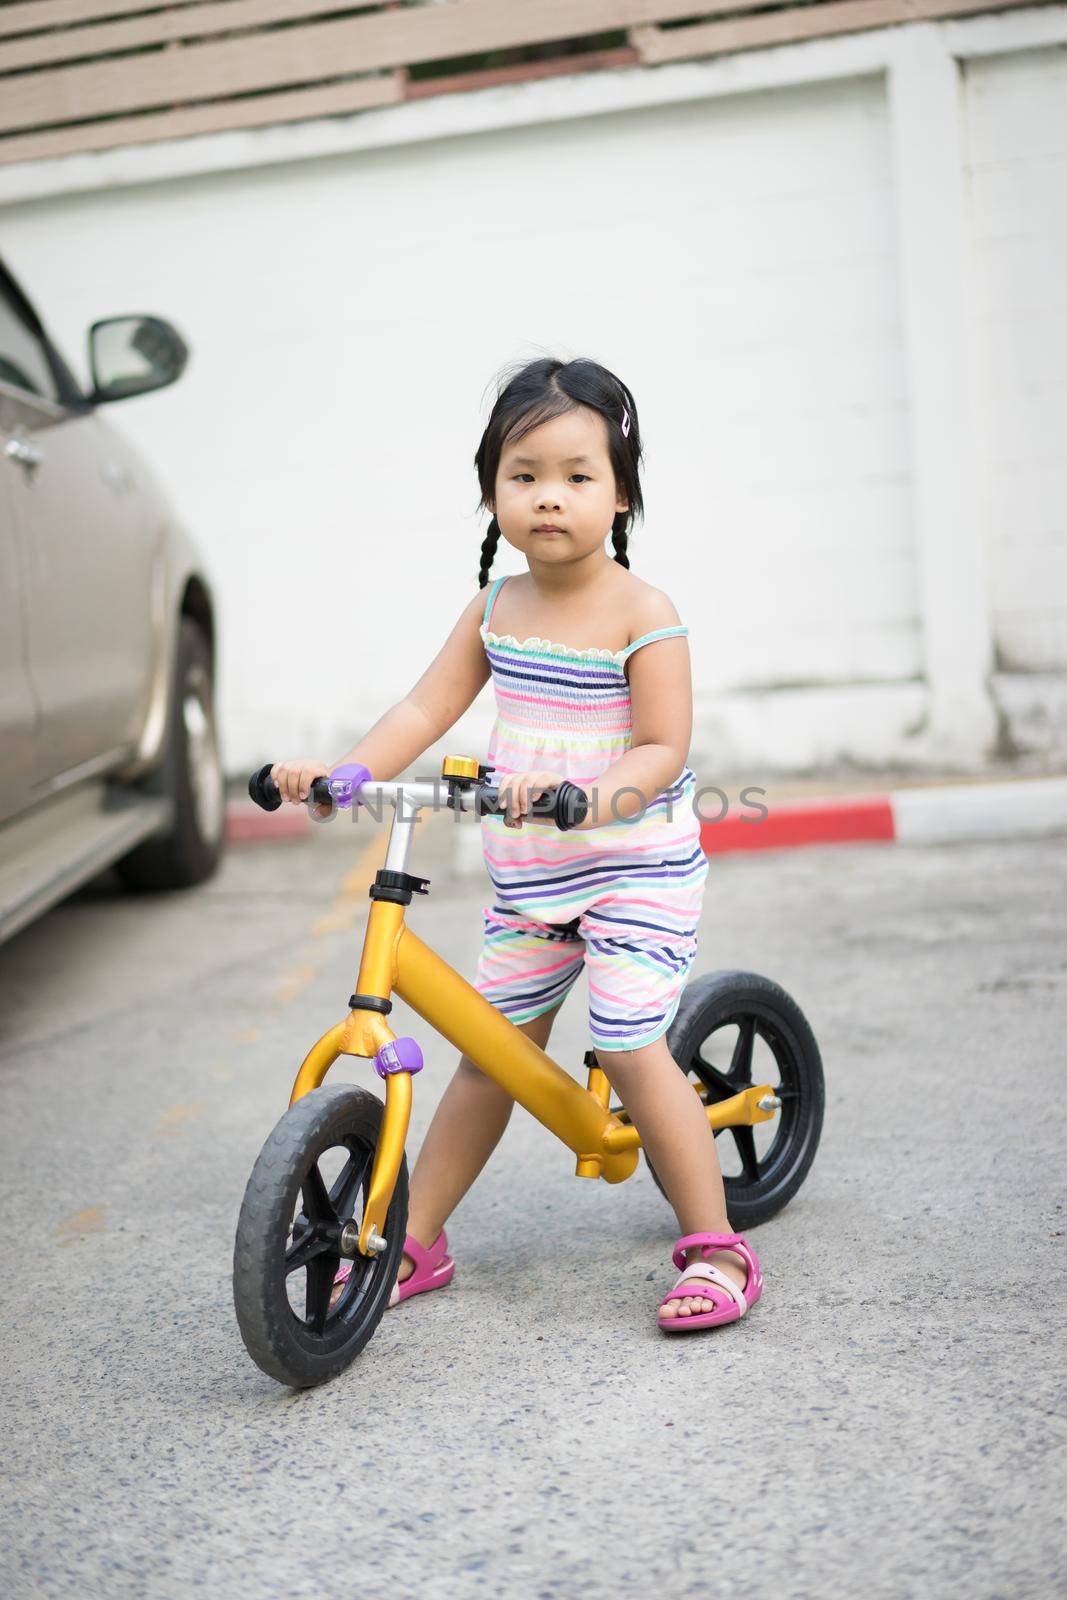 Little girl learns to riding balance bike in car park by domonite